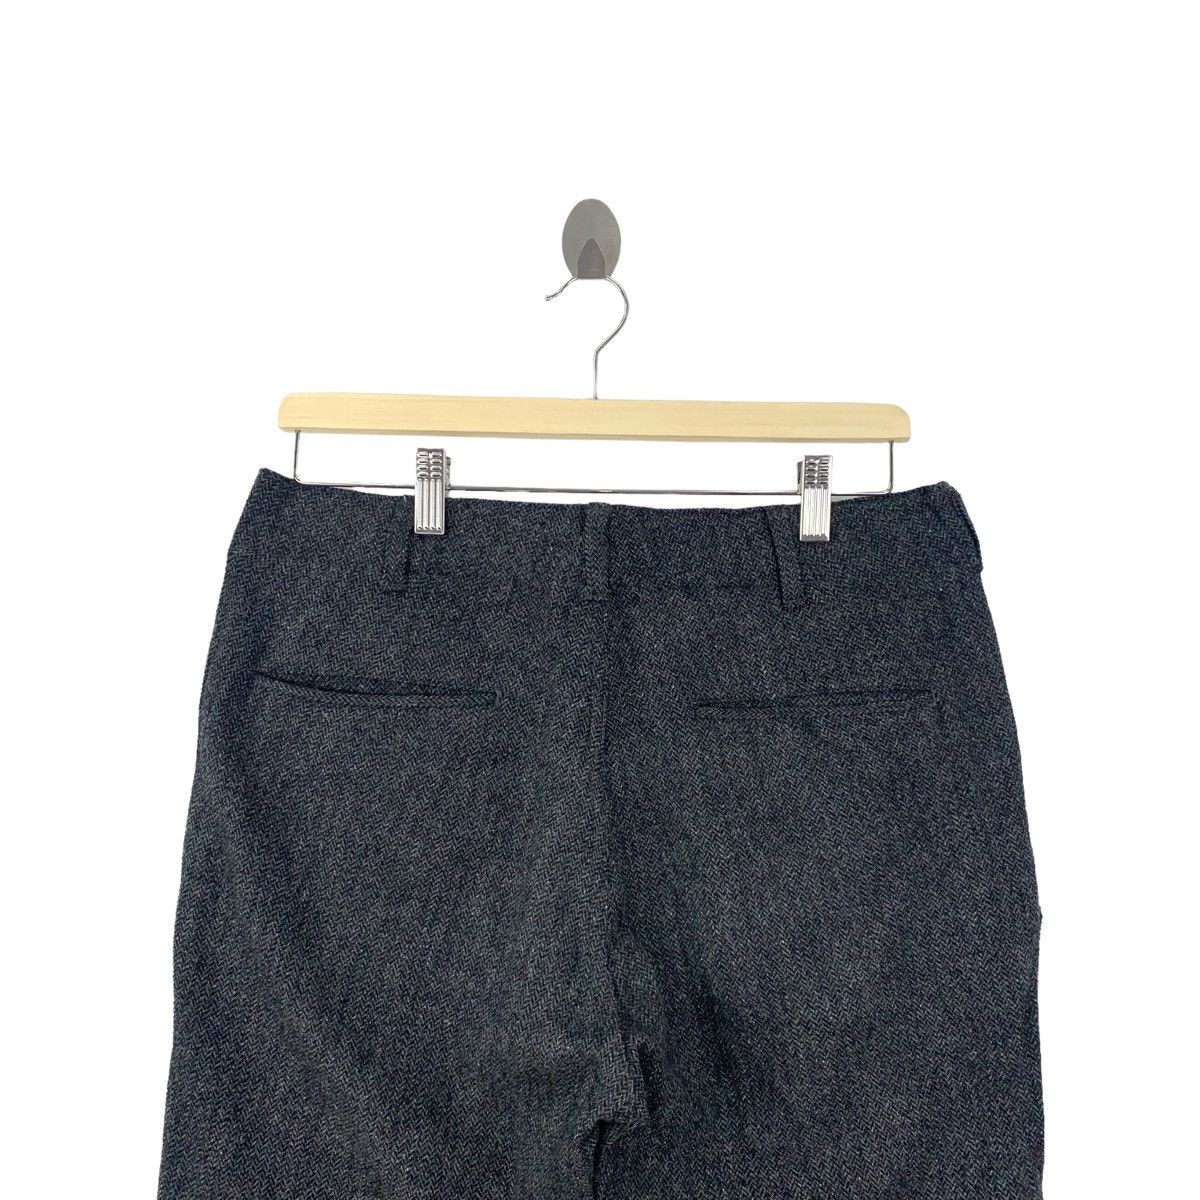 Beauty & Youth BEAUTY & YOUTH United Arrows Japanese Brand Wool Trouser Size US 32 / EU 48 - 6 Thumbnail